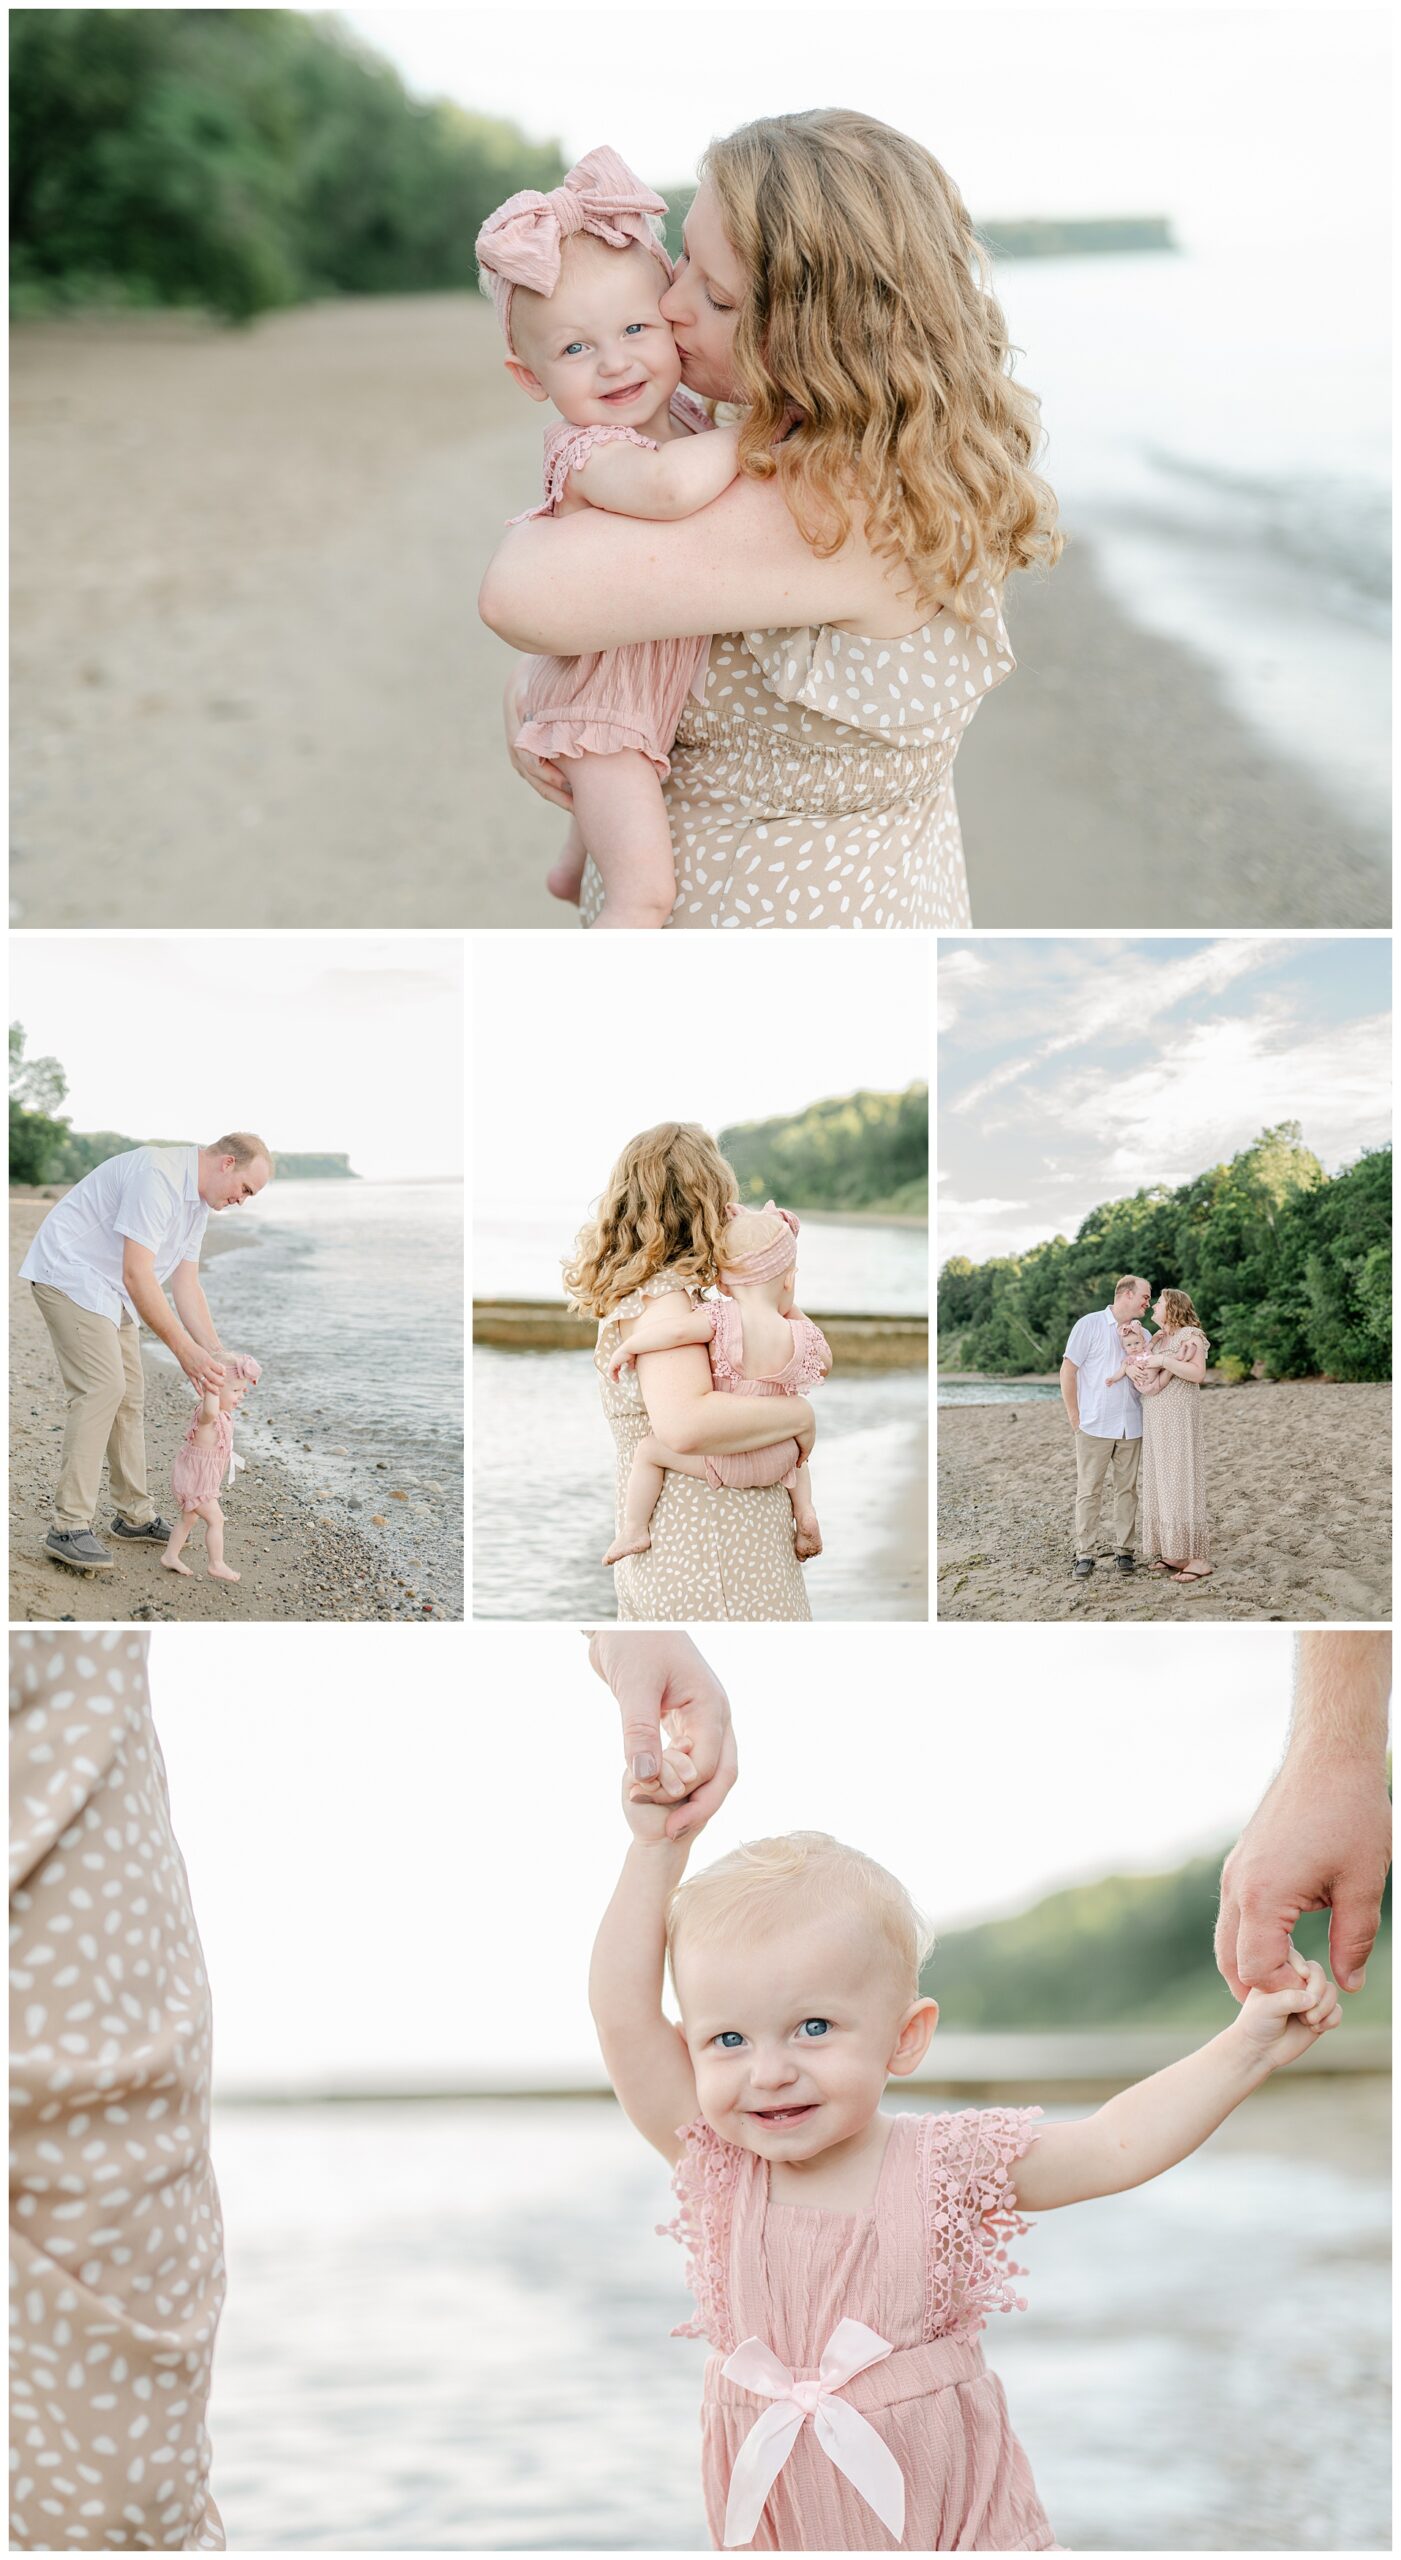 This photo features several images from a Milwaukee family photo session at the best beach in Milwaukee - Grant Park!